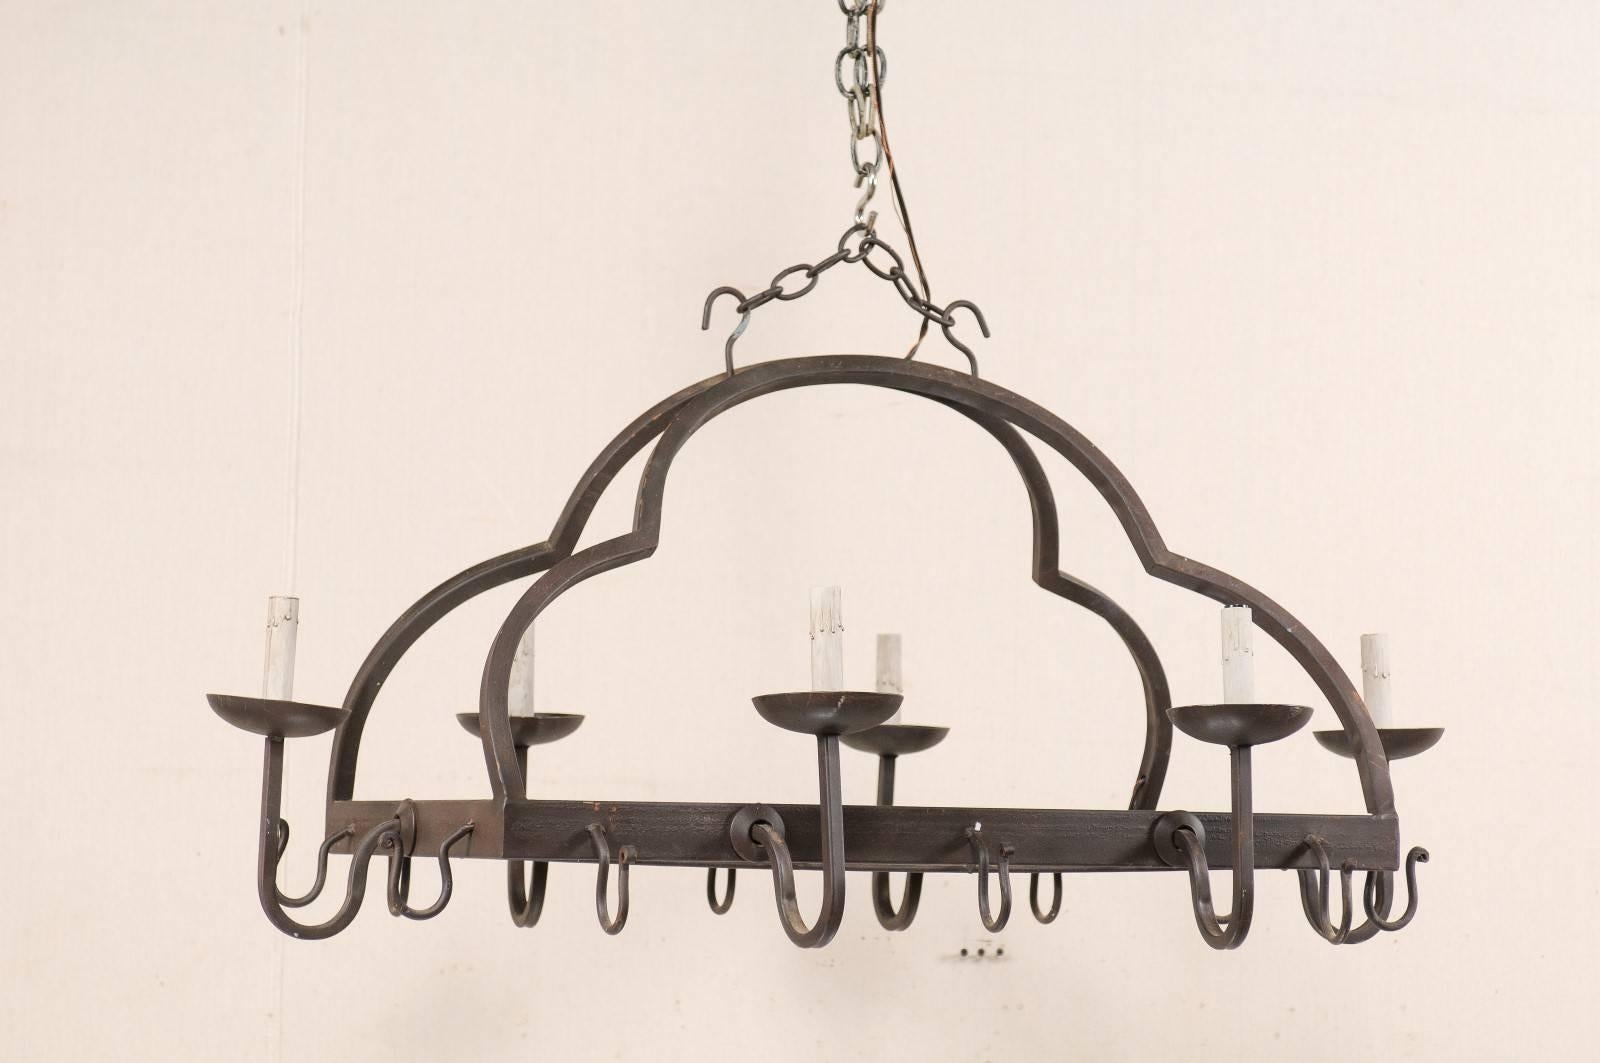 A French mid-20th century six-light forged iron chandelier. This vintage French forged iron chandelier features a rectangular-shaped, grid interior body, with an dual-arching design connecting each of its four corners to the upper canopy, creating a